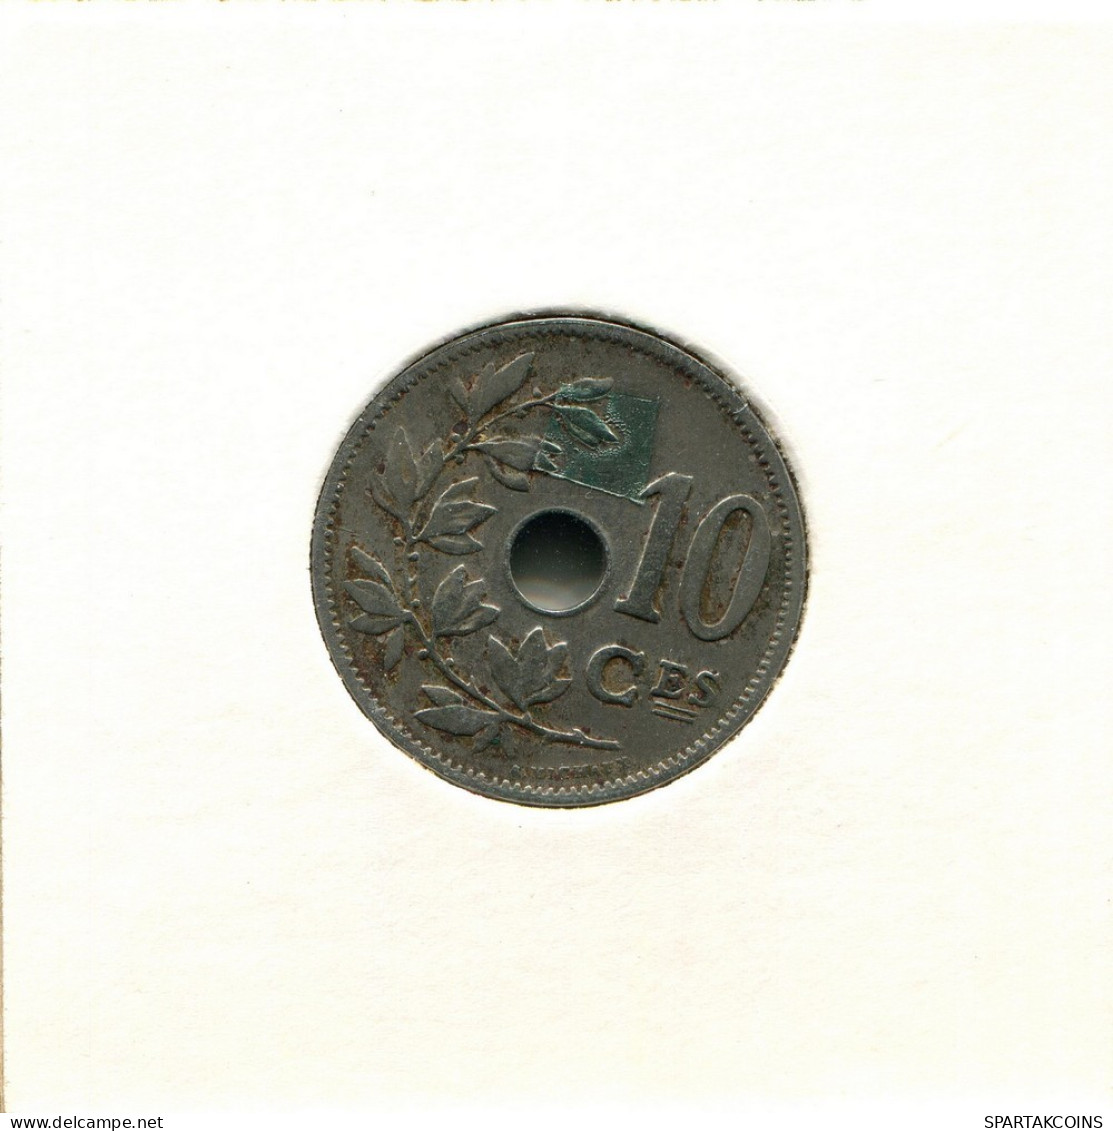 10 CENTIMES 1902 FRENCH Text BELGIUM Coin #BB259.U.A - 10 Cents